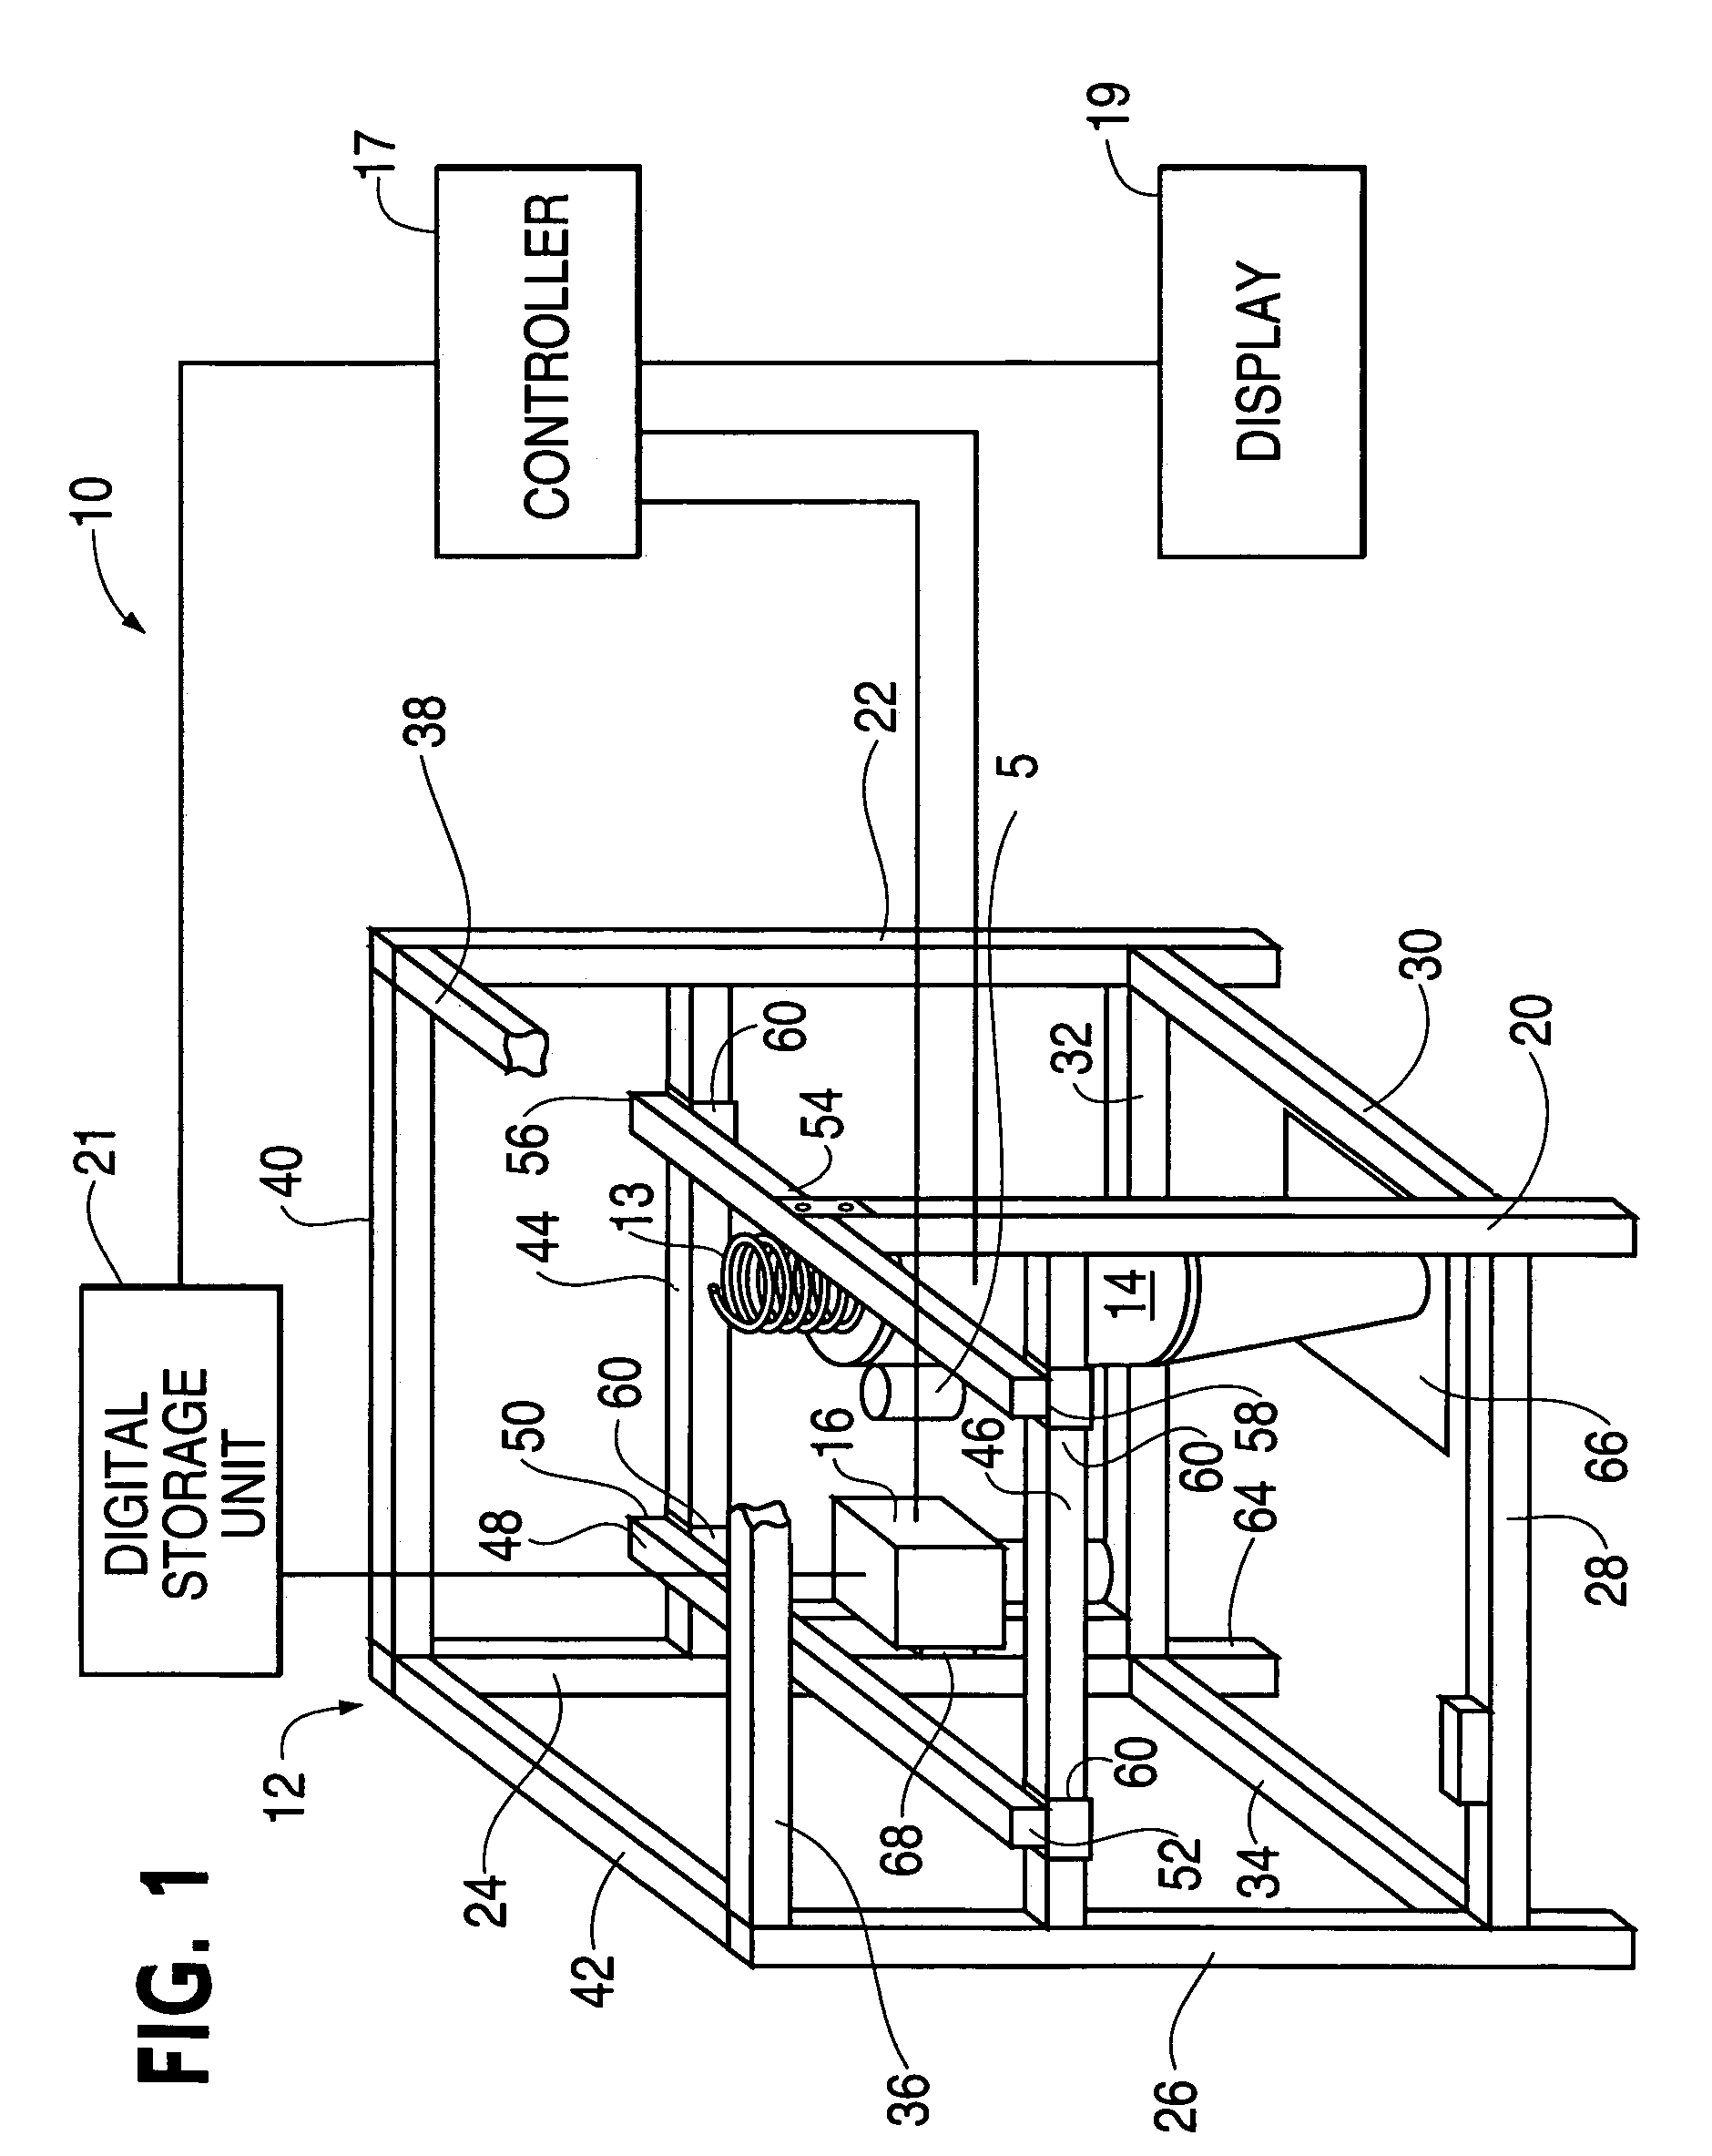 Translatable ultrasonic thermography inspection apparatus and method